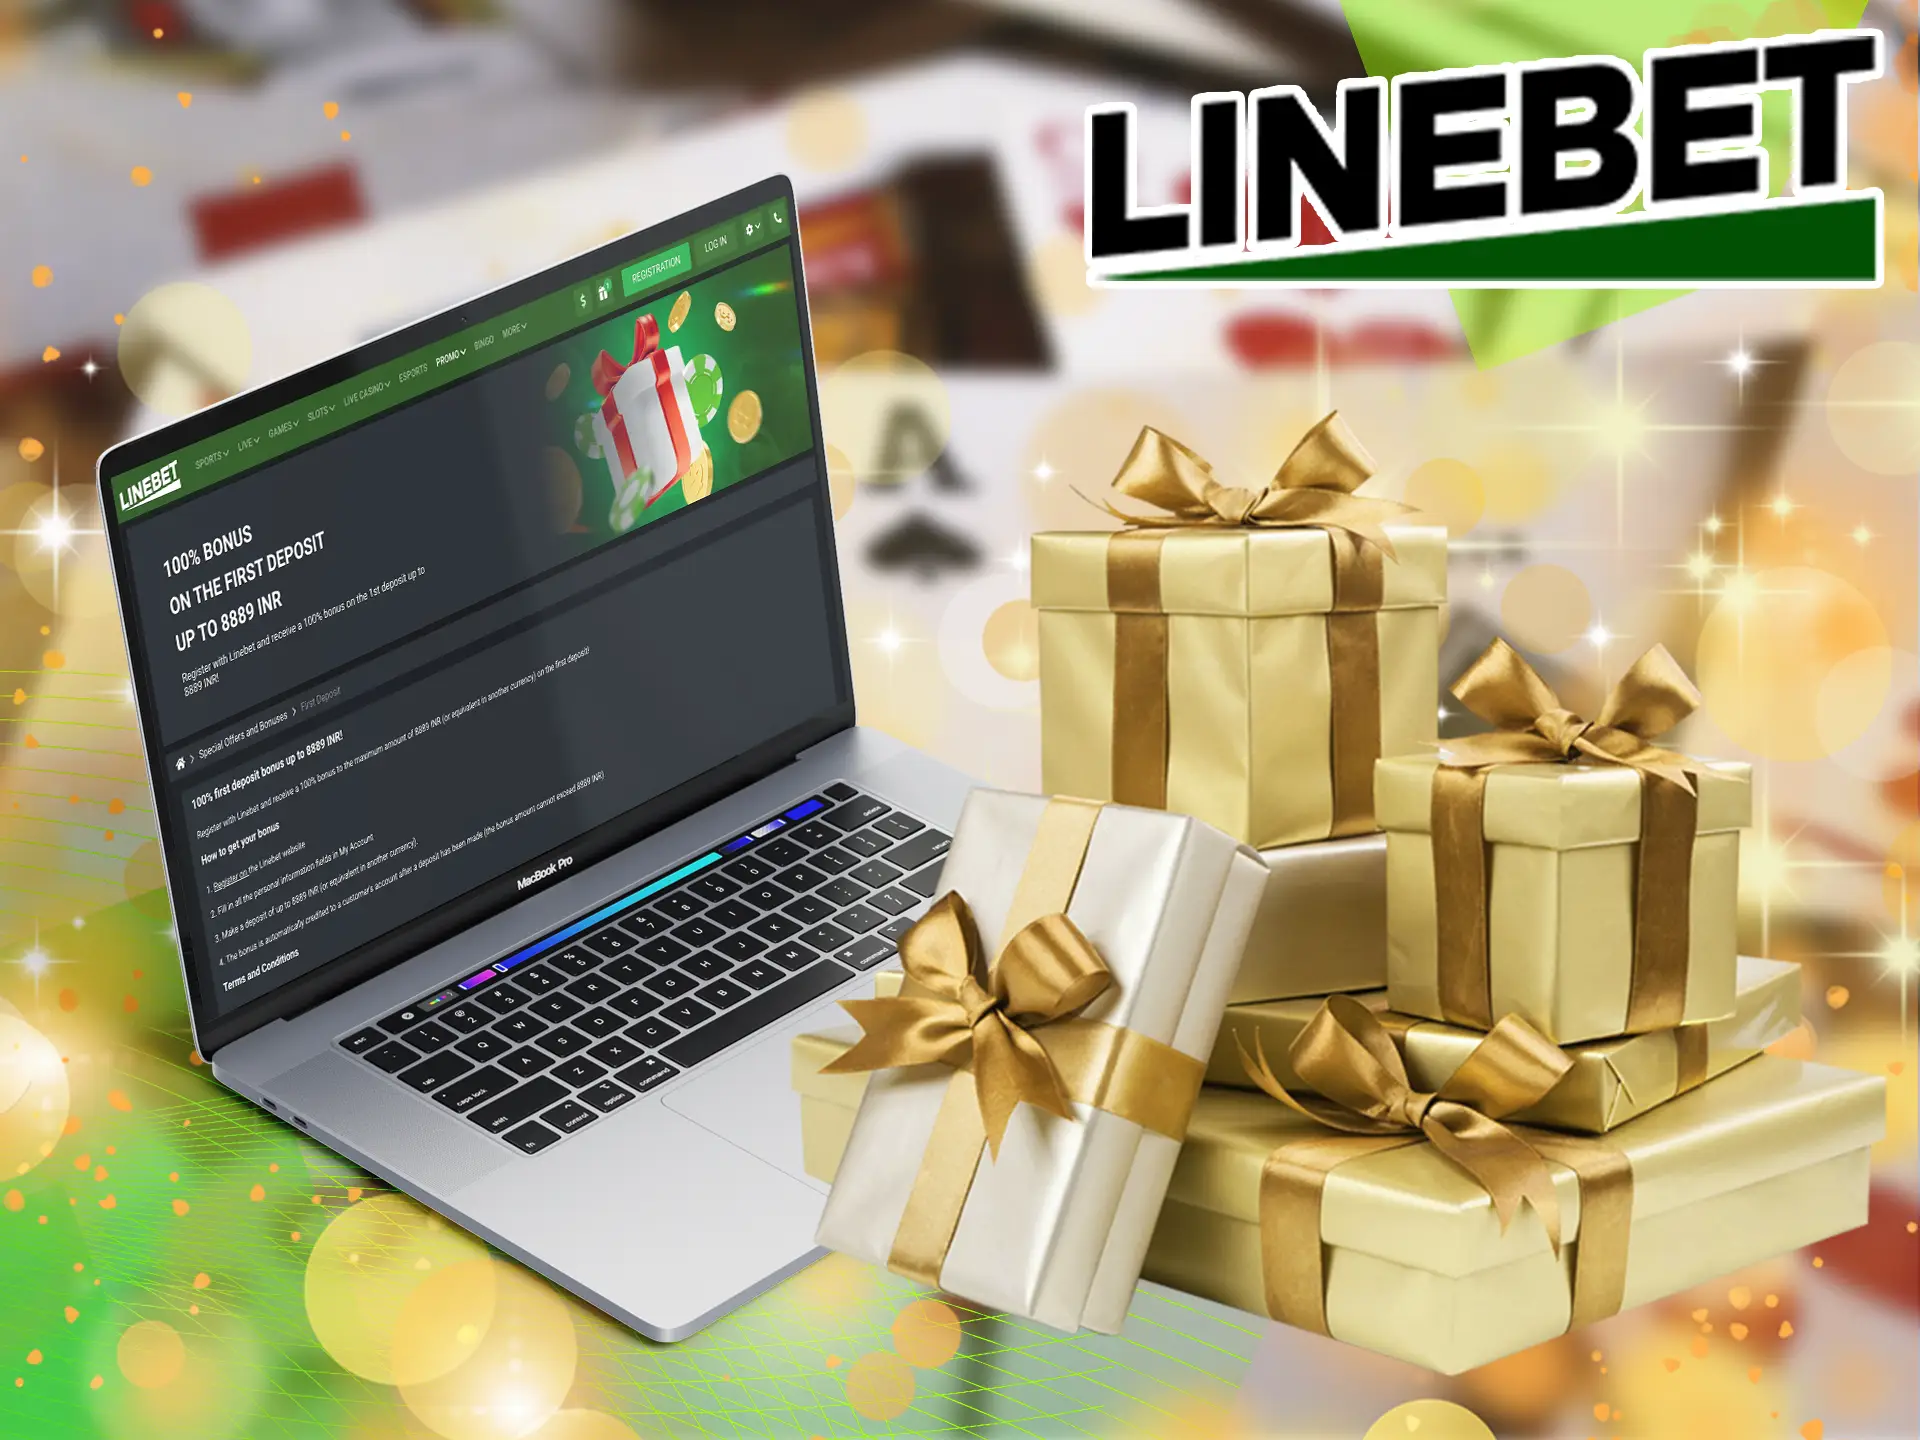 New users will receive a nice compliment from Linebet for creating an account, it can be used in both casino and sports betting.